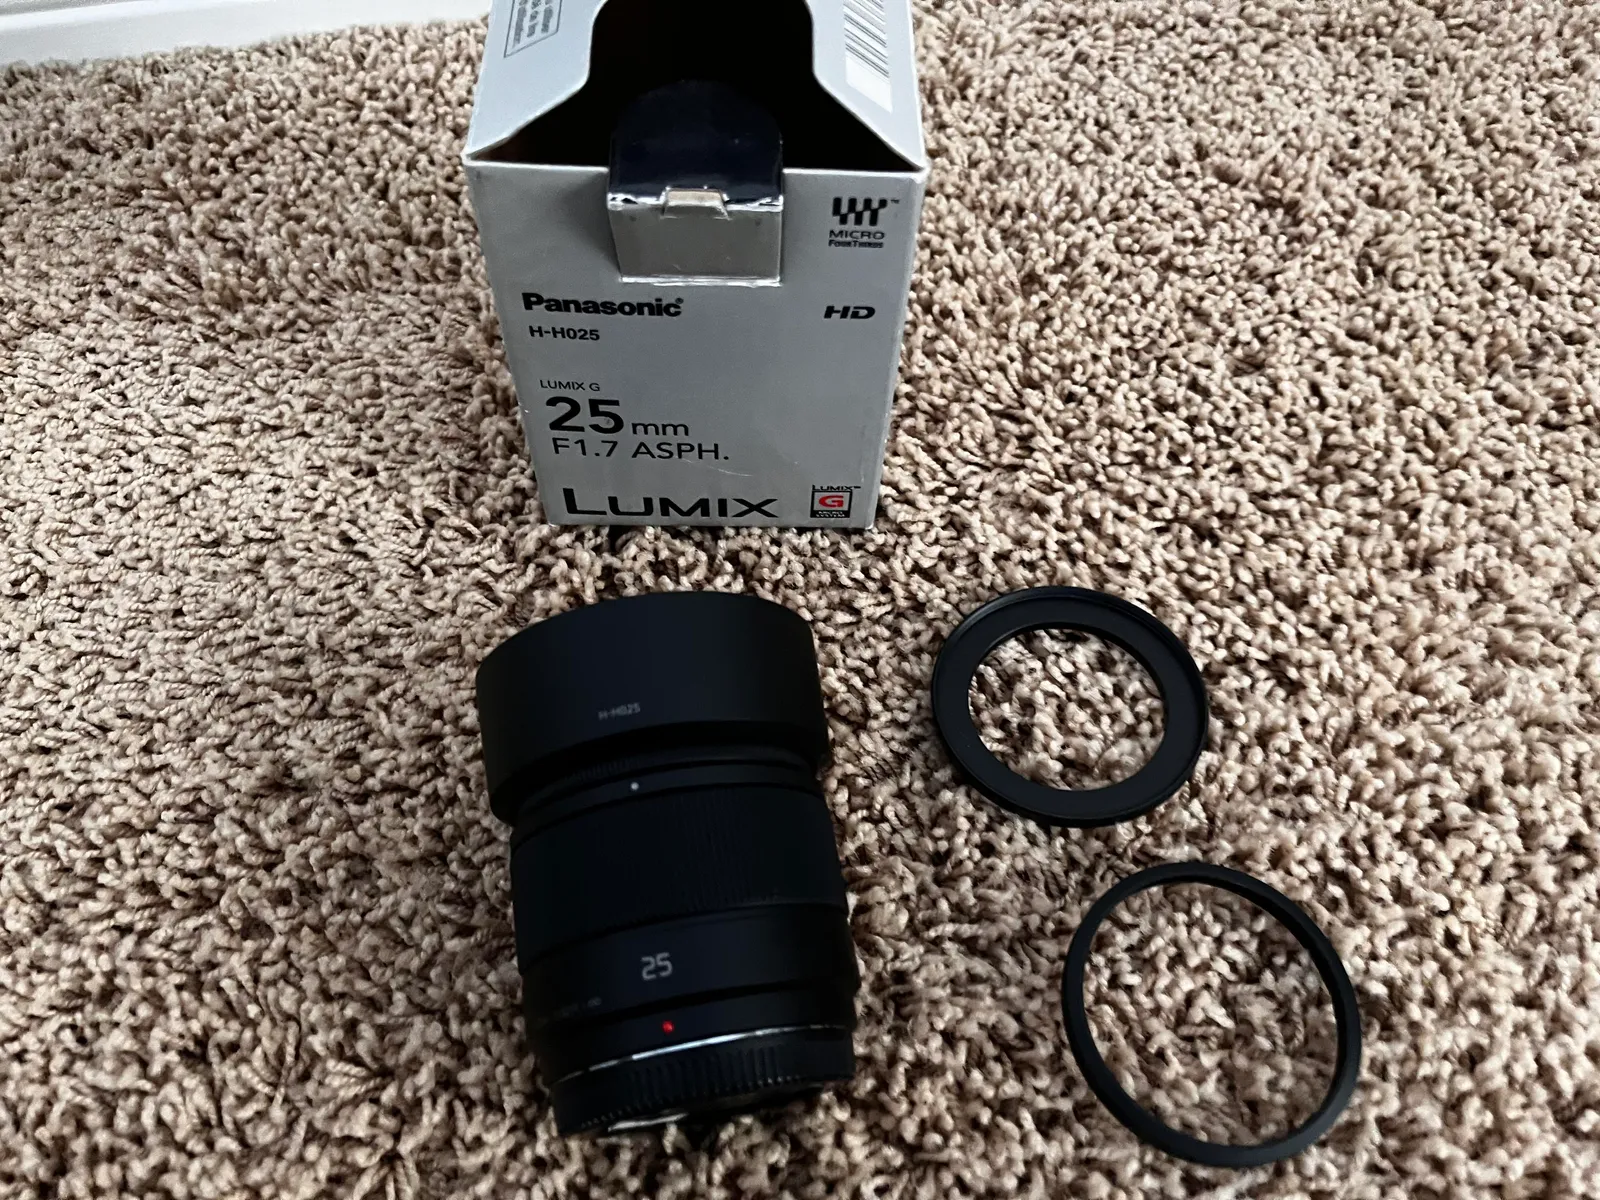 Panasonic 25mm f1.7 g lens with adapters, hood, and caps